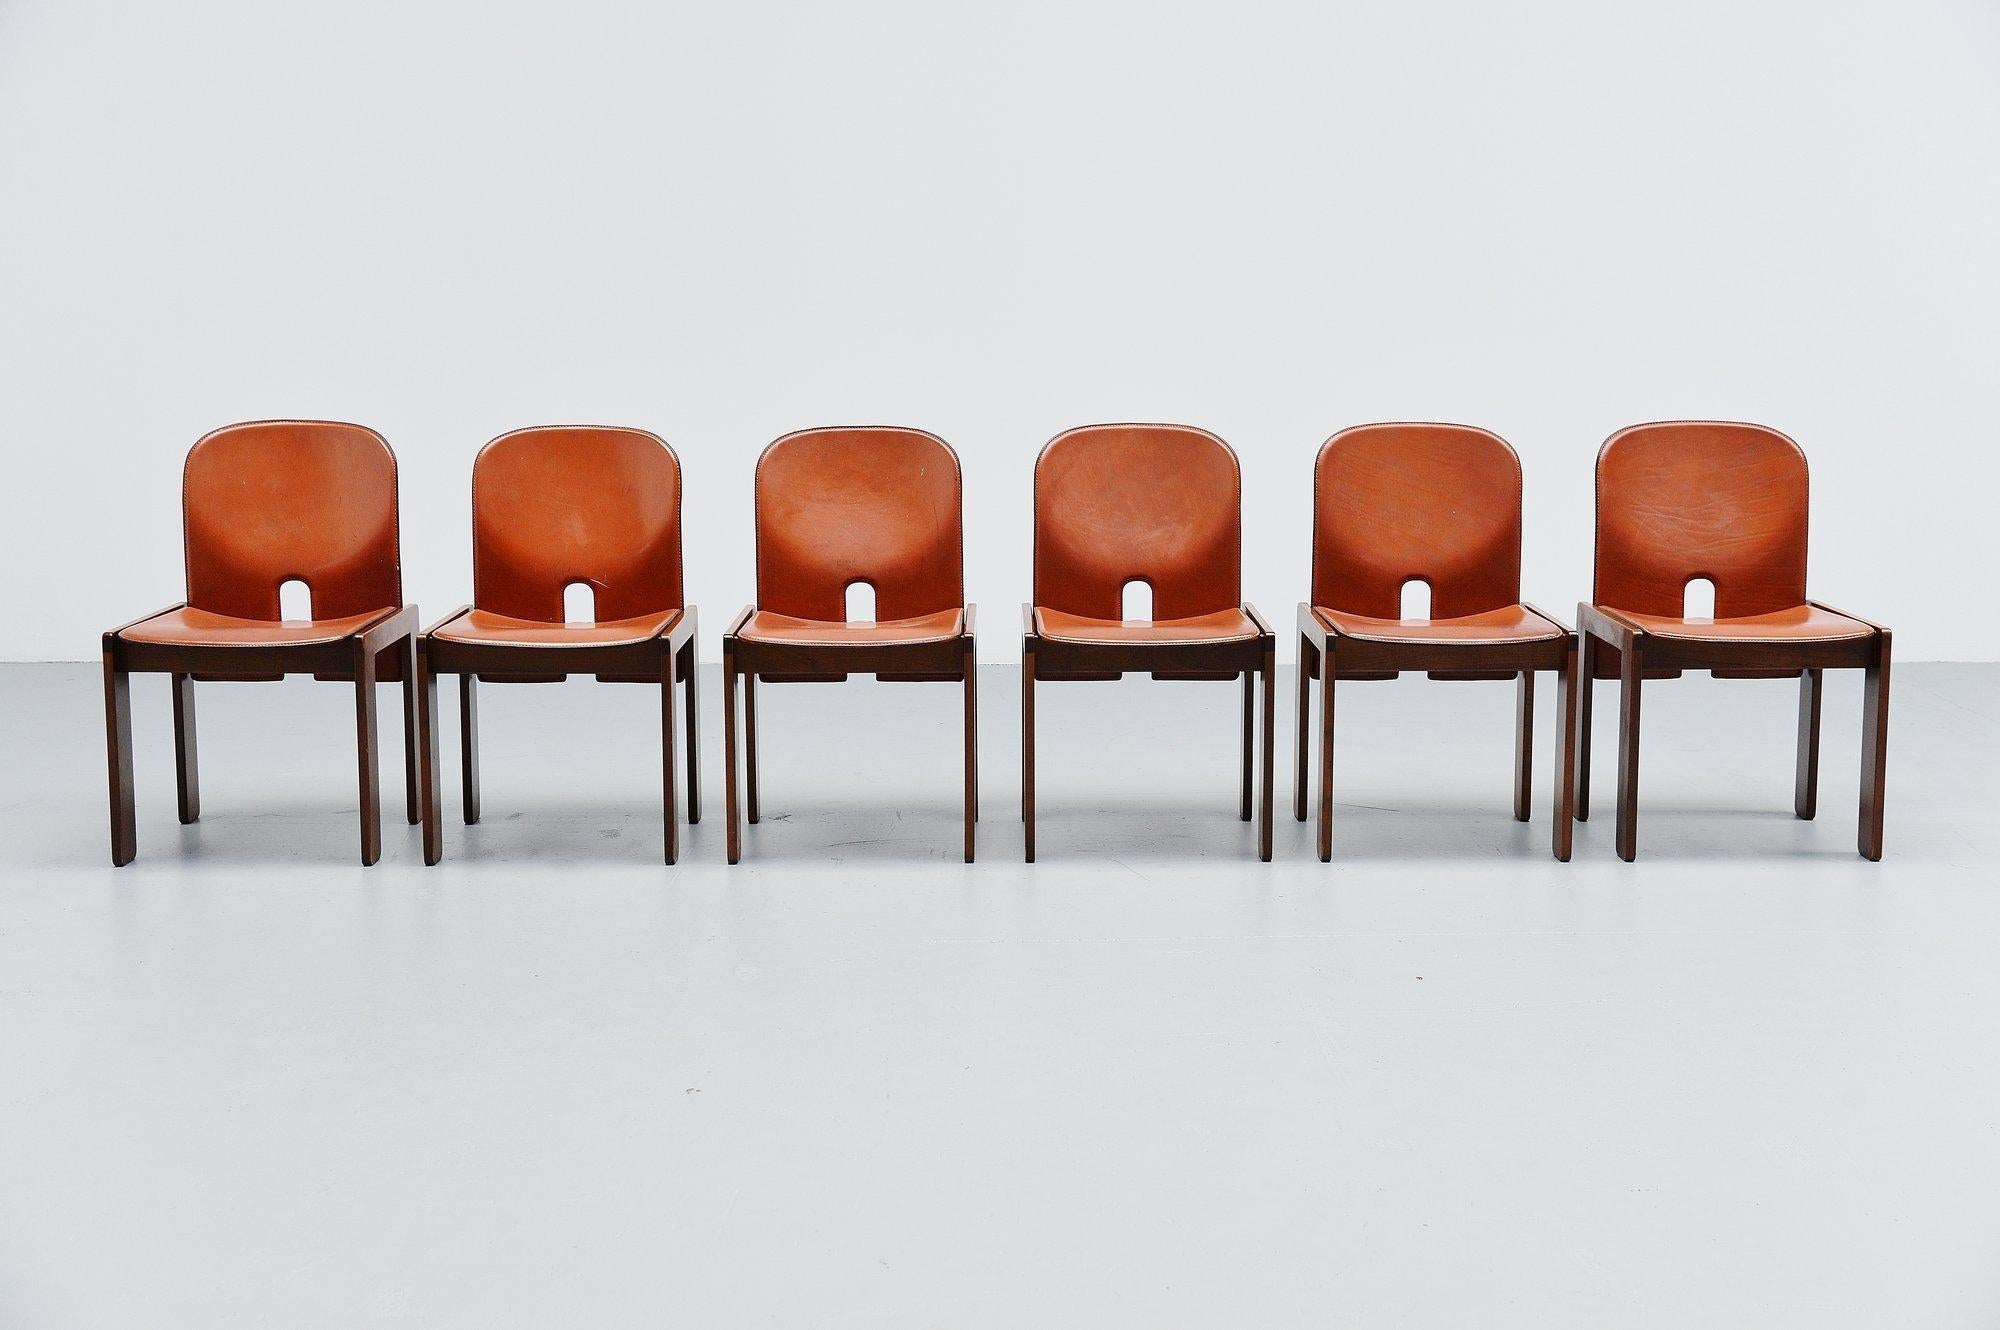 Nice set of 6 model 121 dining chairs designed by Afra e Tobia Scarpa and manufactured by Cassina, Italy 1965. These chairs have walnut wooden frames and plywood seats and backs covered with cognac colored leather. Chairs are marked with the Cassina